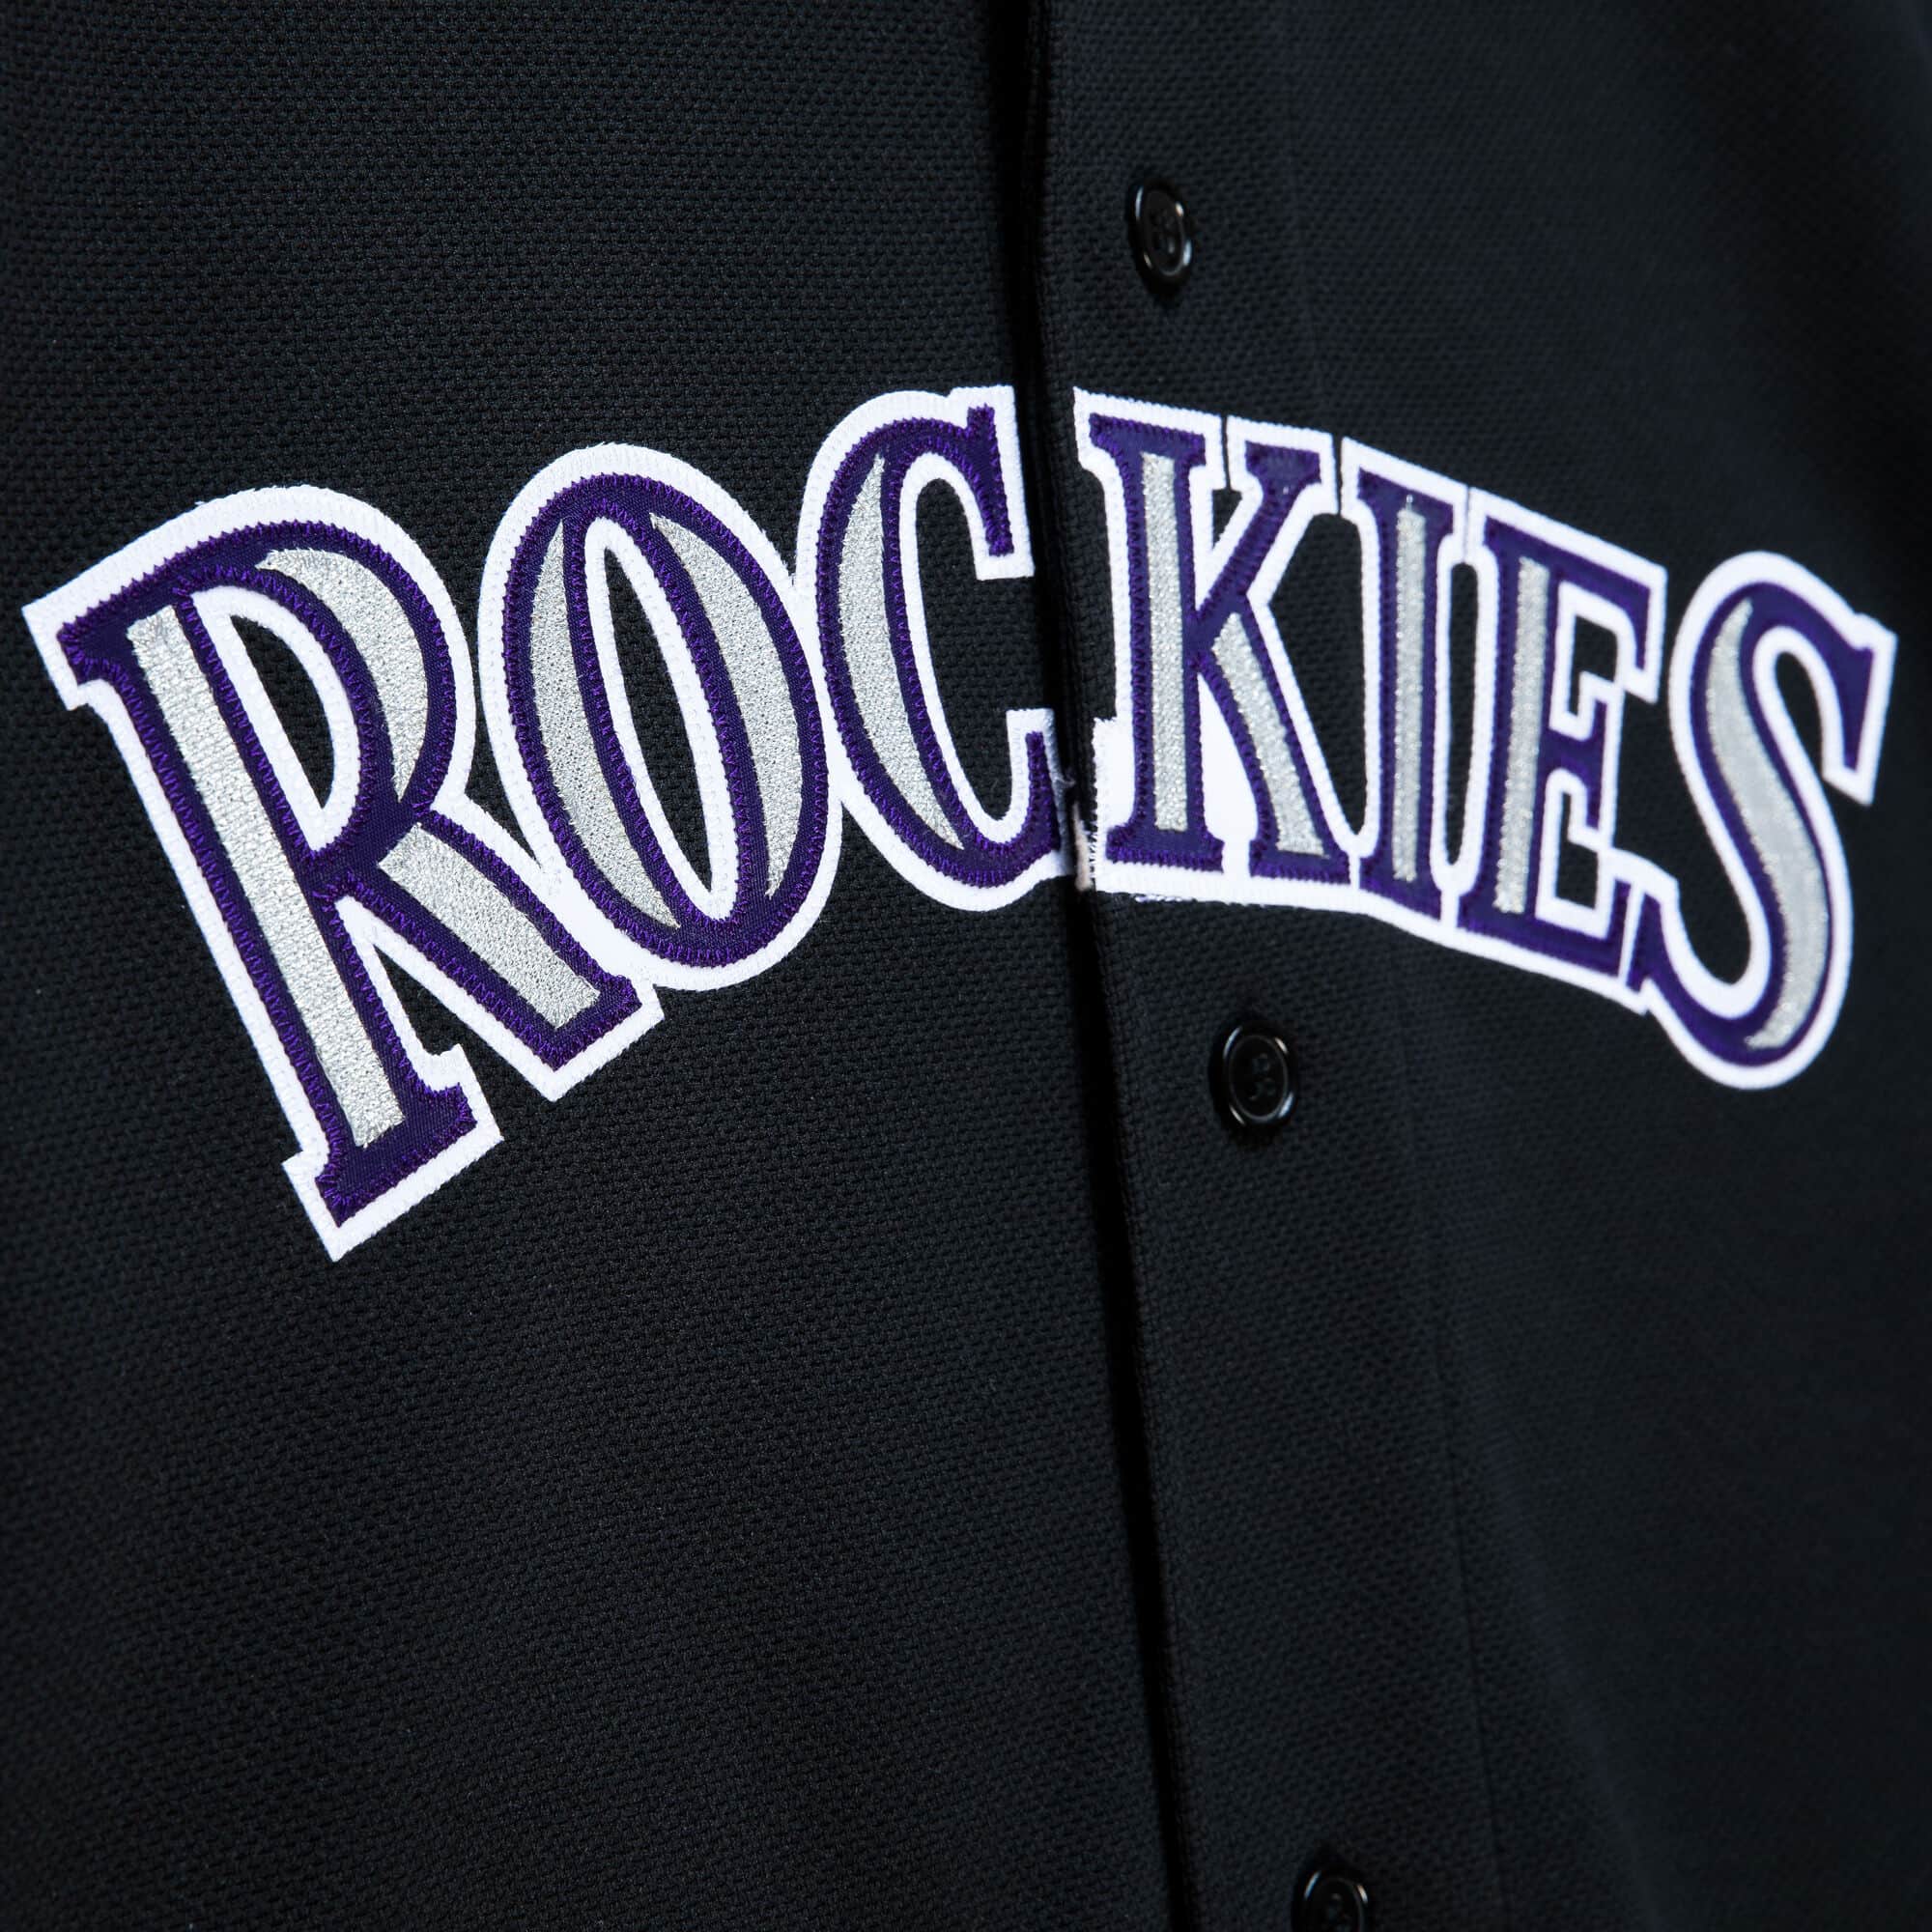 Mitchell & Ness Colorado Rockies Todd Helton 2003 Black Cooperstown Collection Batting Practice Jersey